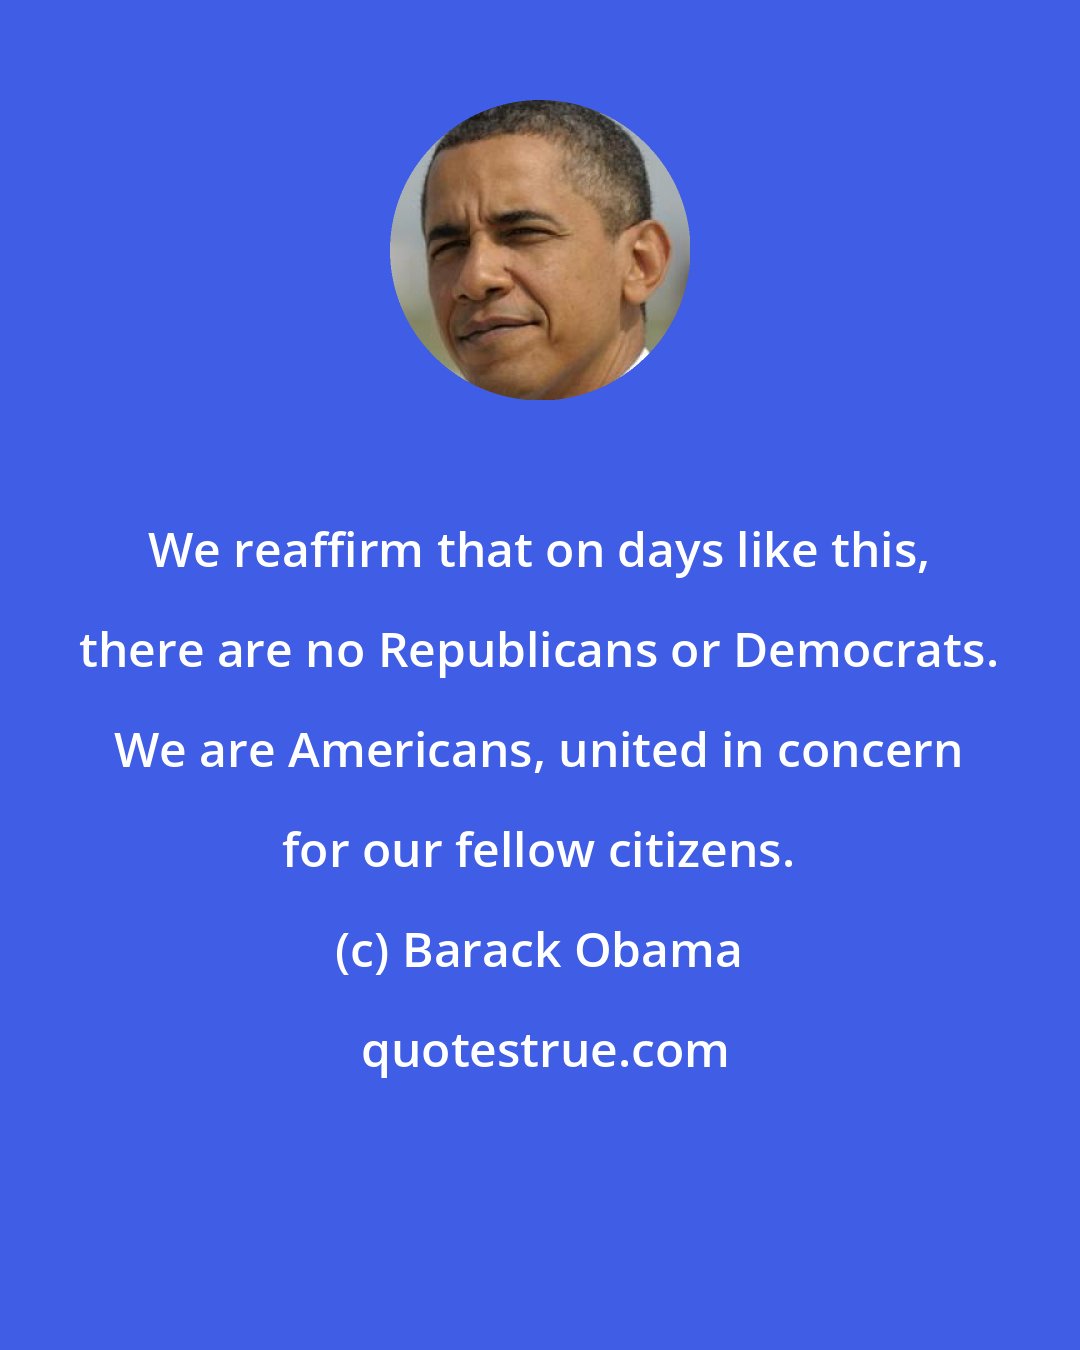 Barack Obama: We reaffirm that on days like this, there are no Republicans or Democrats. We are Americans, united in concern for our fellow citizens.